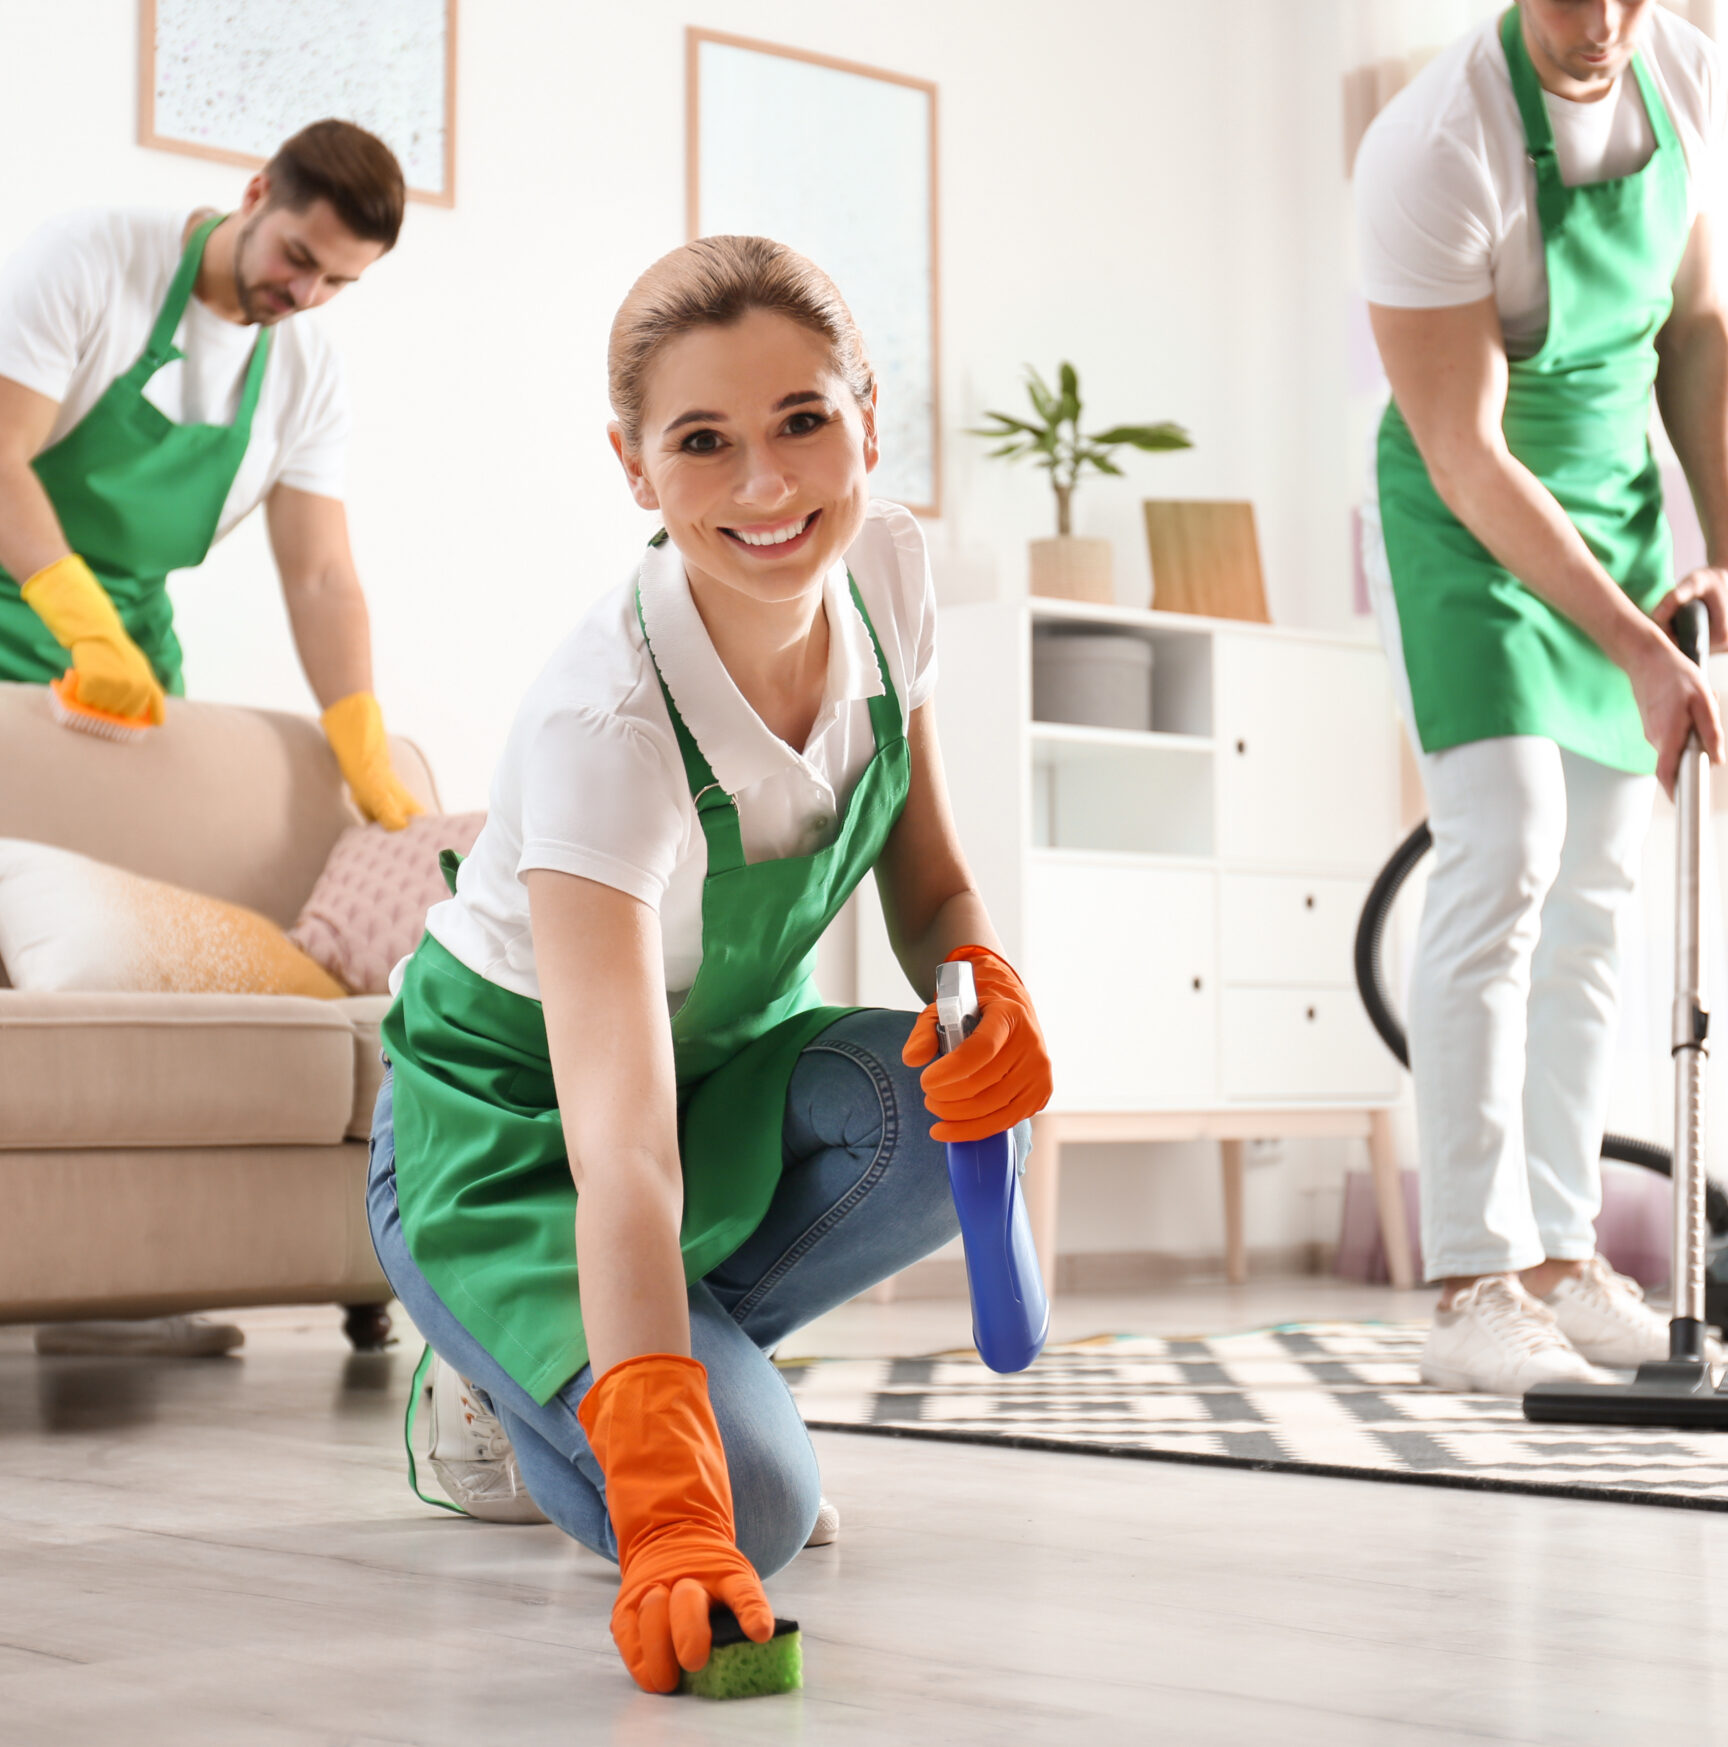 Professional Home Cleaning Service Experts in Fort Mill, SC